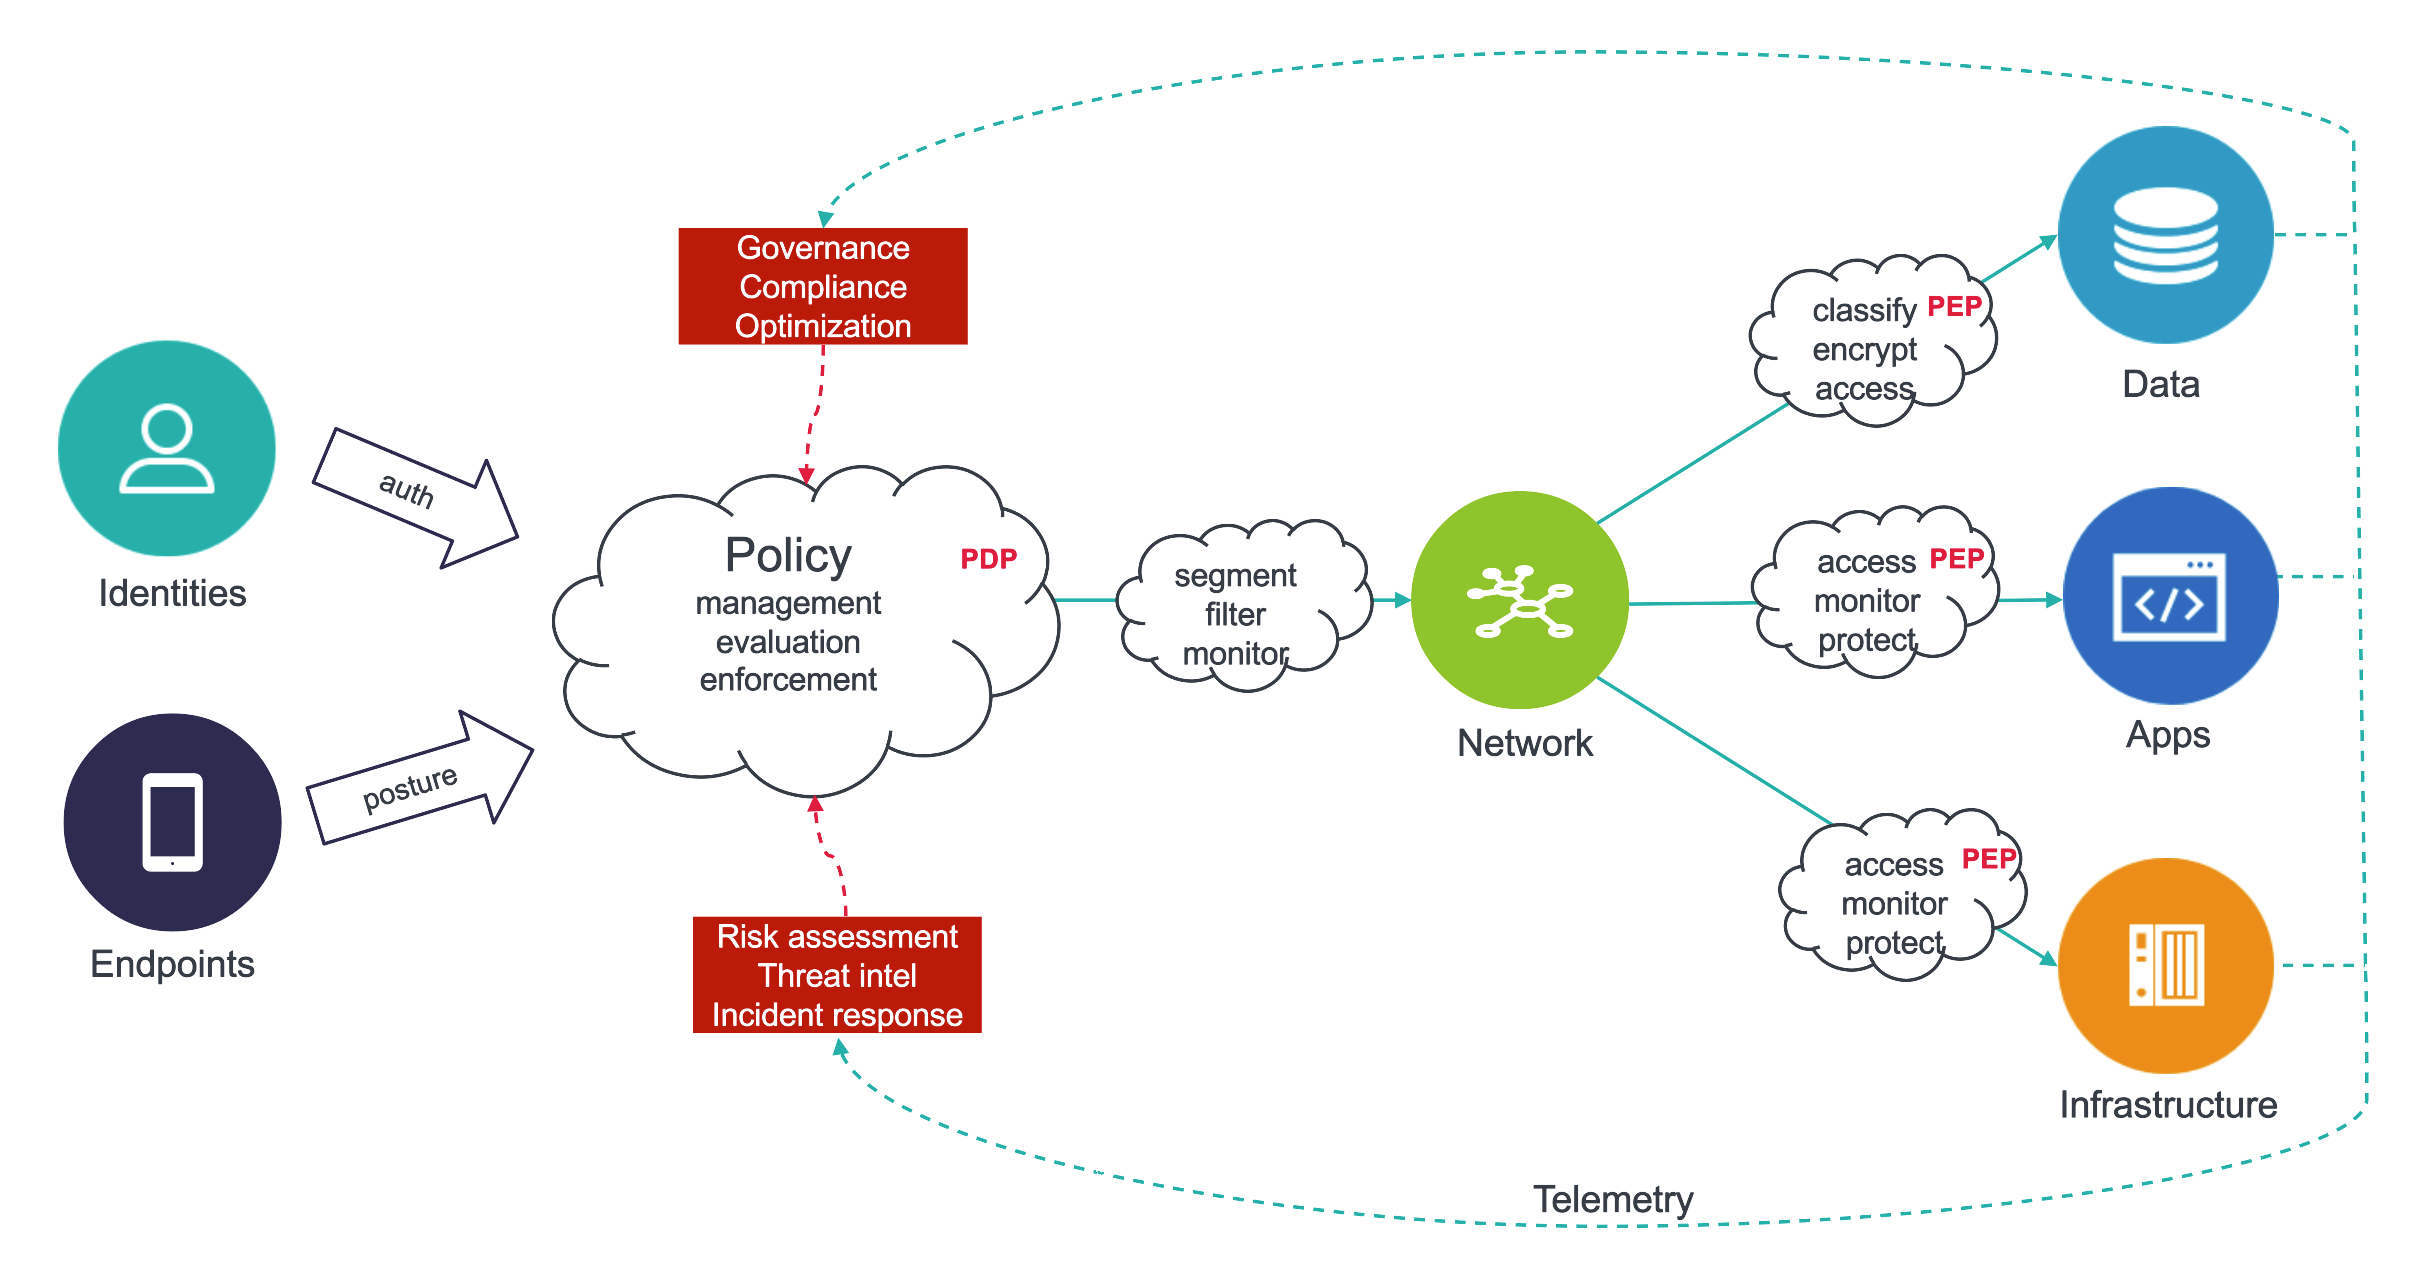 The main components of Zero Trust Network Access architectures